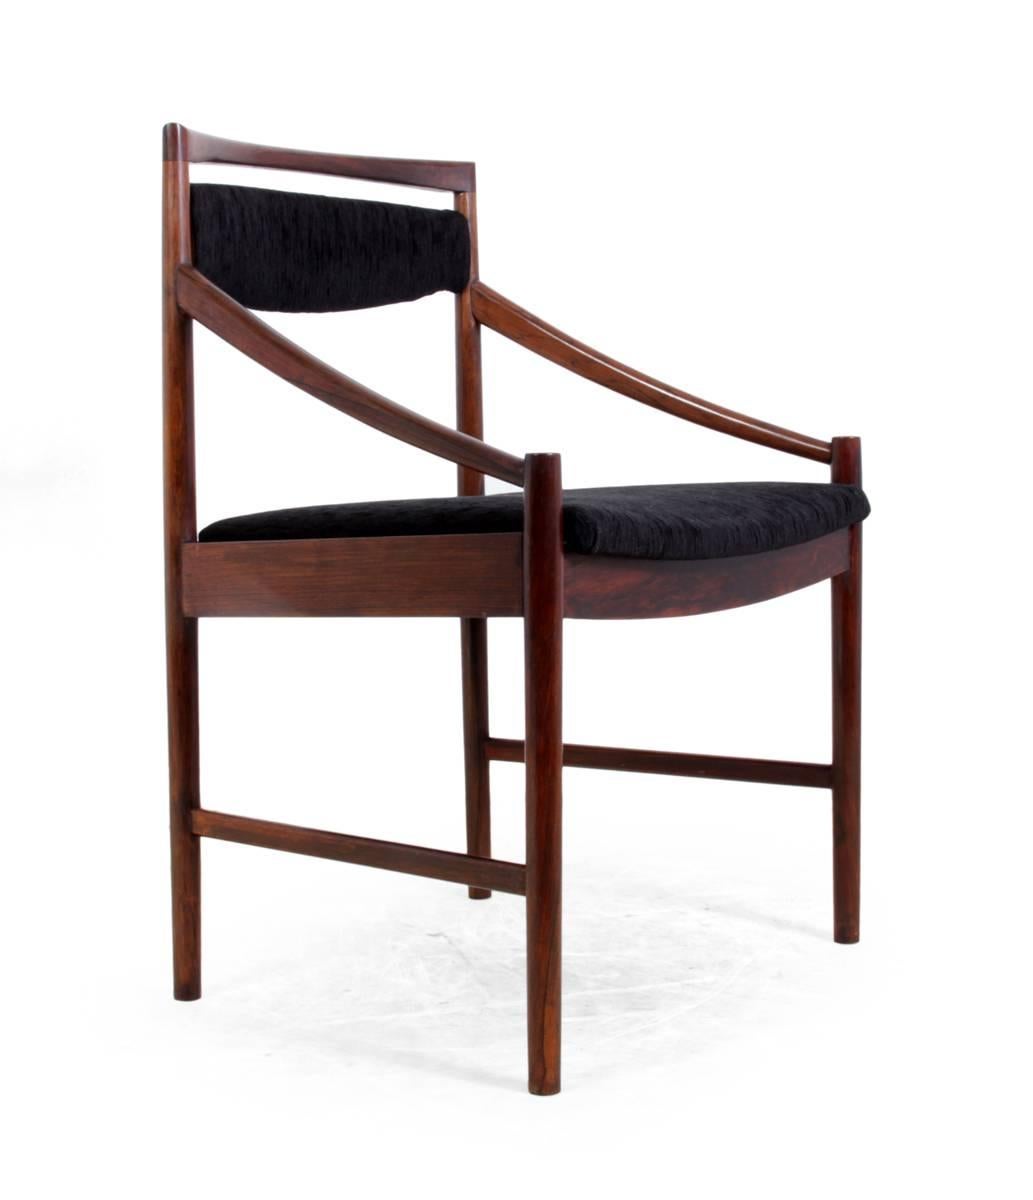 Set of six rosewood dining chairs by McIntosh, circa 1950.
 
Set of six, Mid-Century Modern, solid rosewood, English, dining chairs by McIntosh made in the 1950s. The frames are solid with no loose joints or breaks and these chairs have been fully